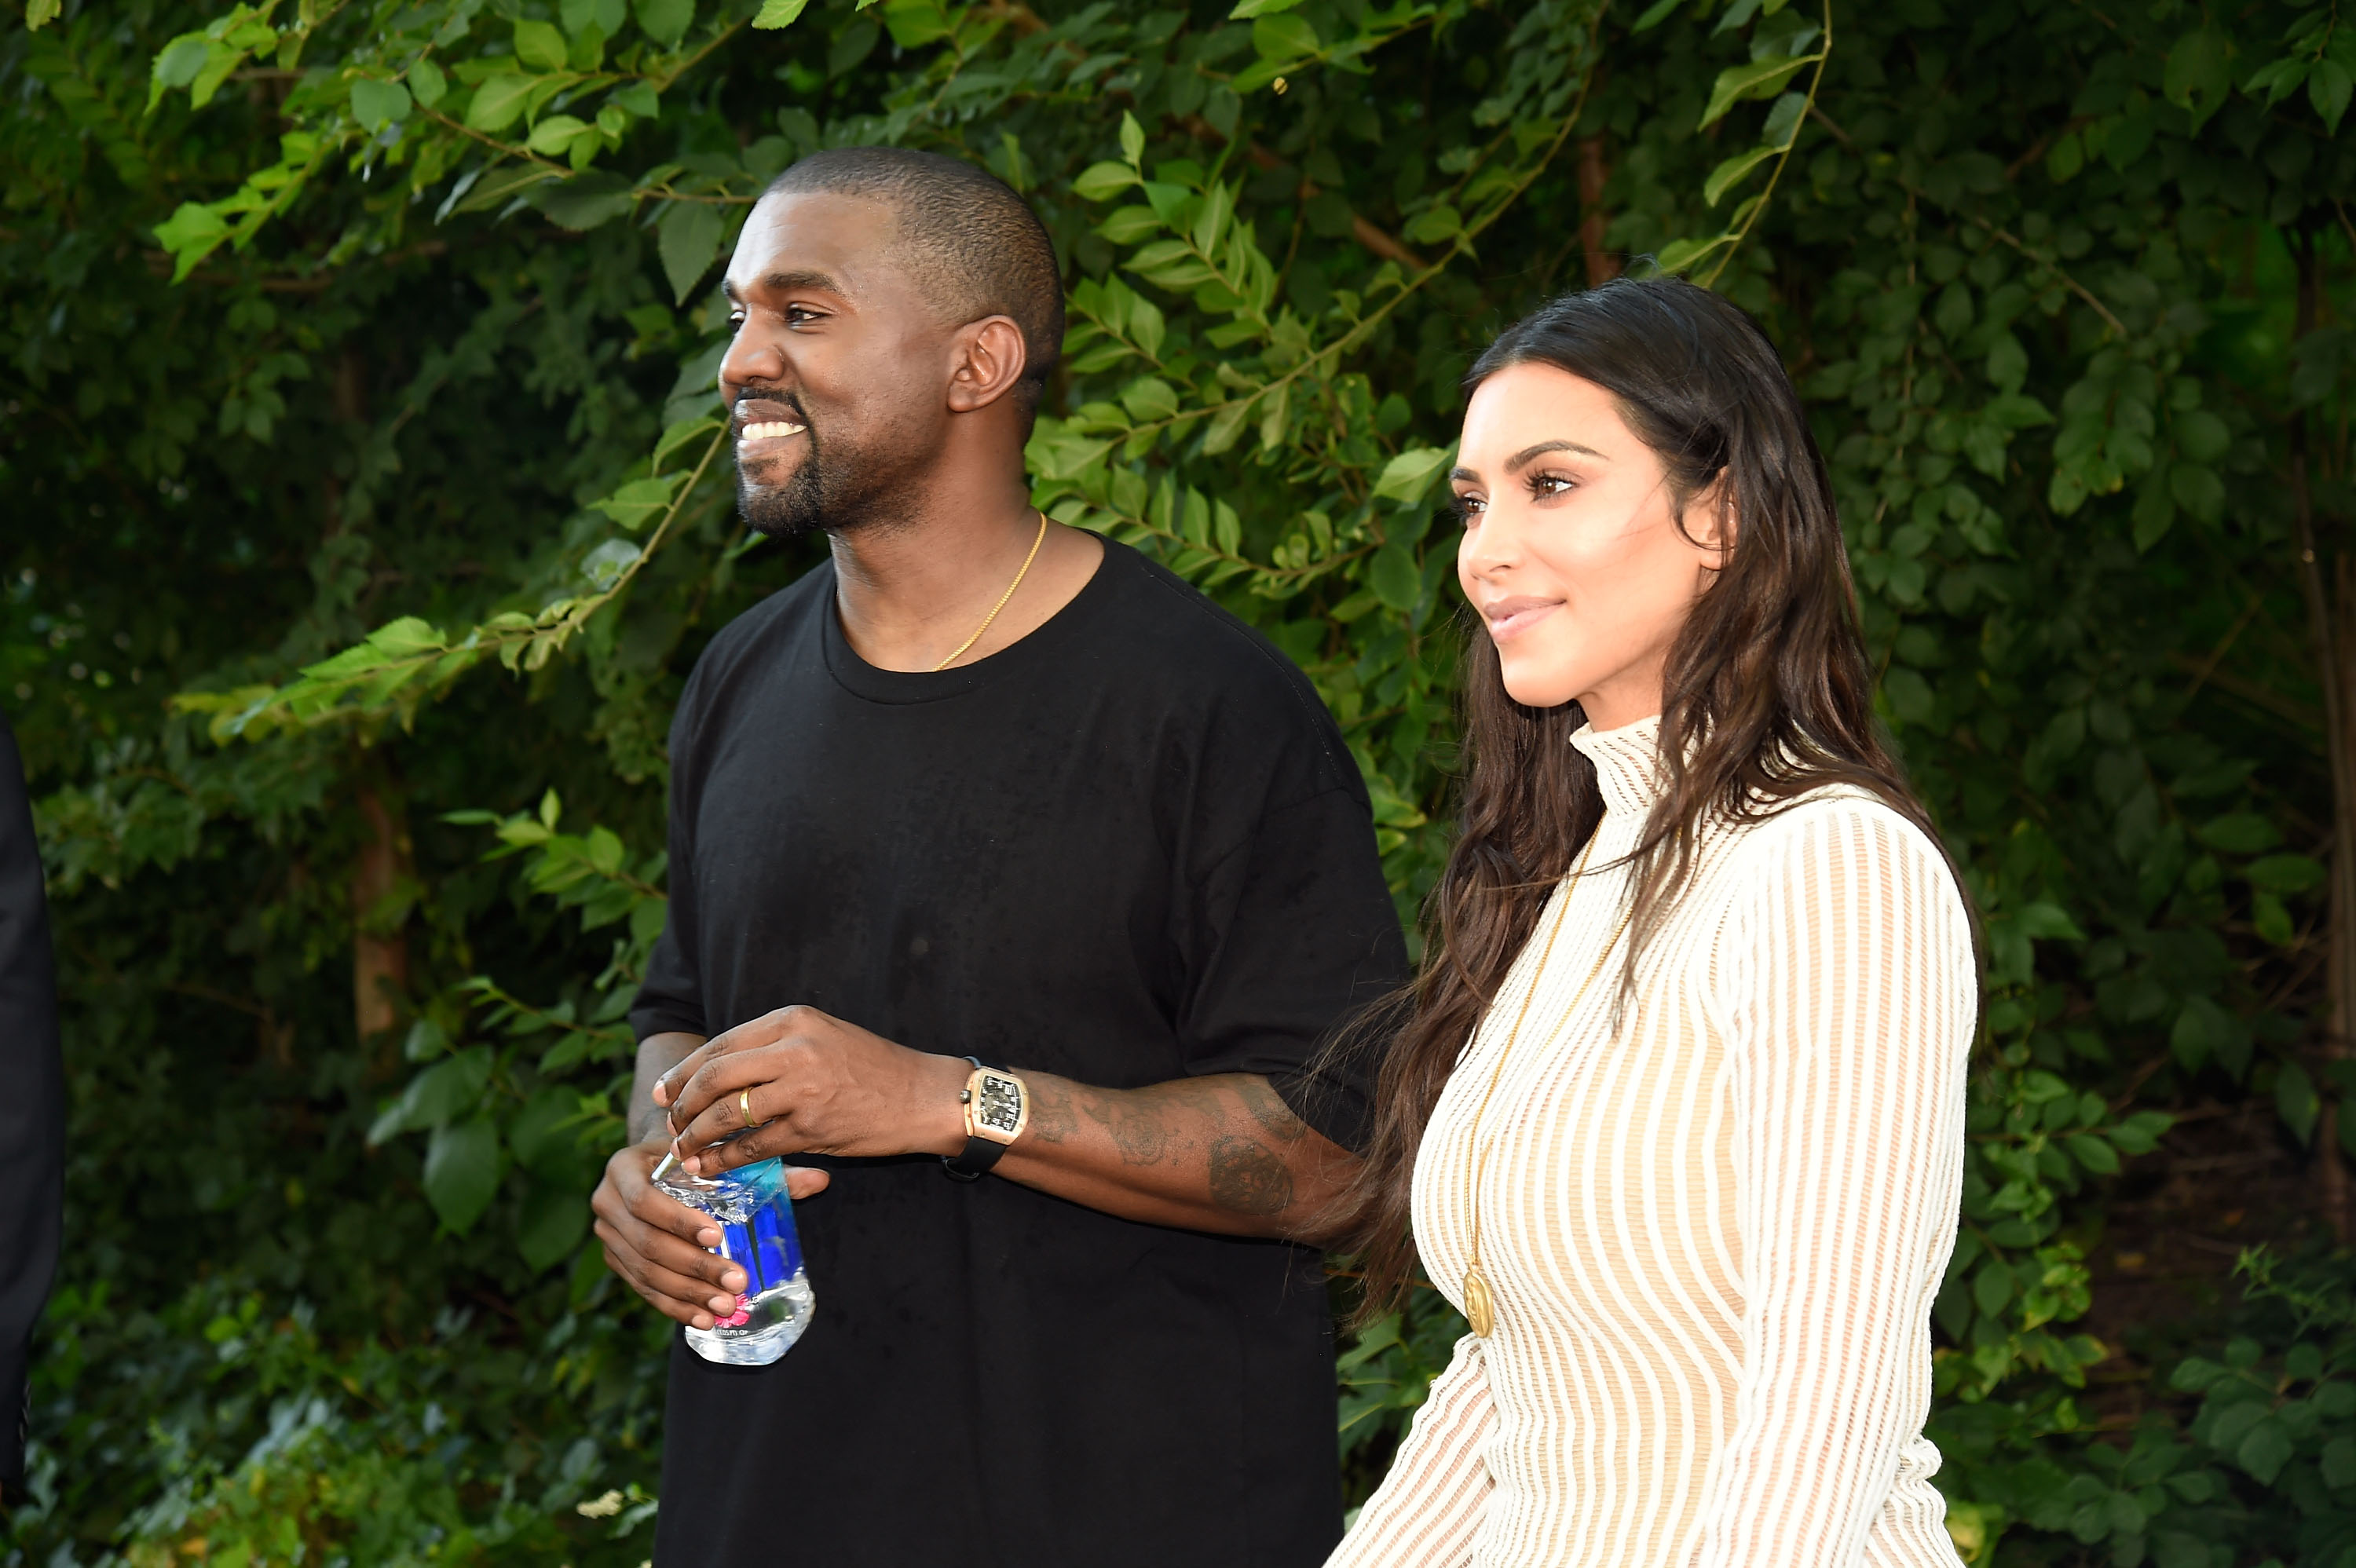 NEW YORK, NY - SEPTEMBER 07:  Kanye West and Kim Kardashian attend the Kanye West Yeezy Season 4 fashion show on September 7, 2016 in New York City.  (Photo by Kevin Mazur/Getty Images for Yeezy Season 4)